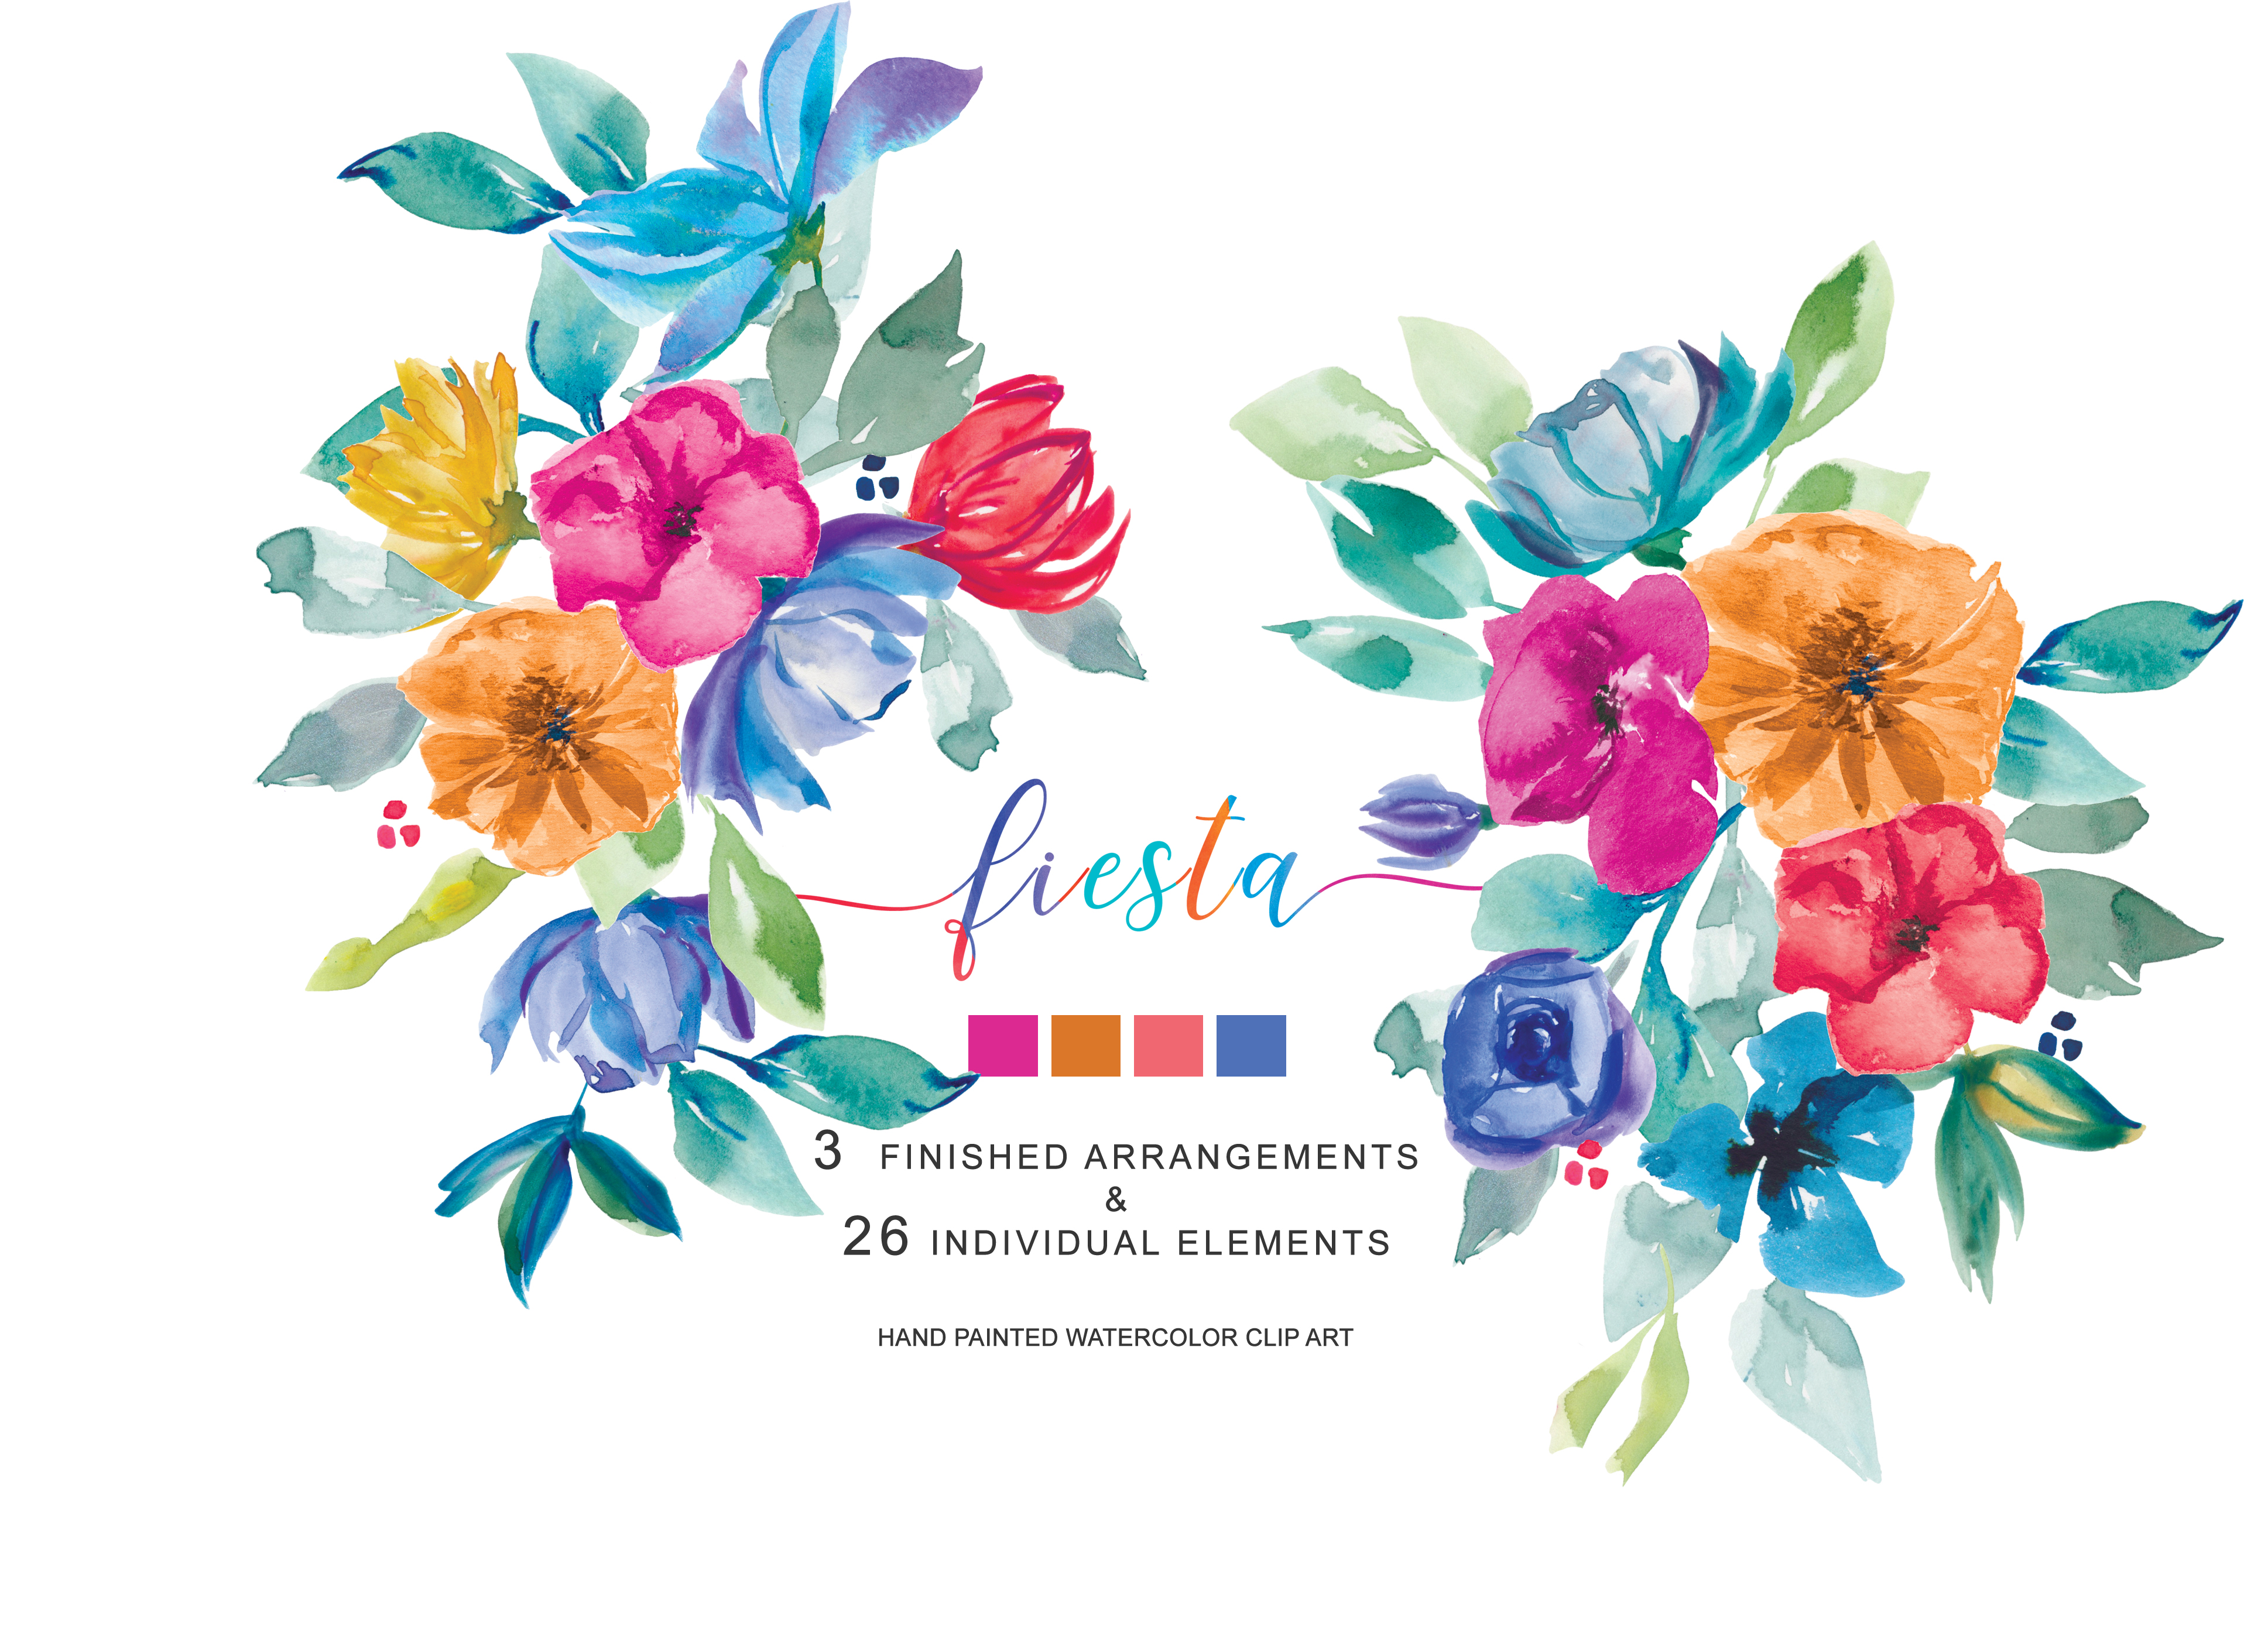 Hand Painted Colorful Watercolor and Gouache Floral Clipart